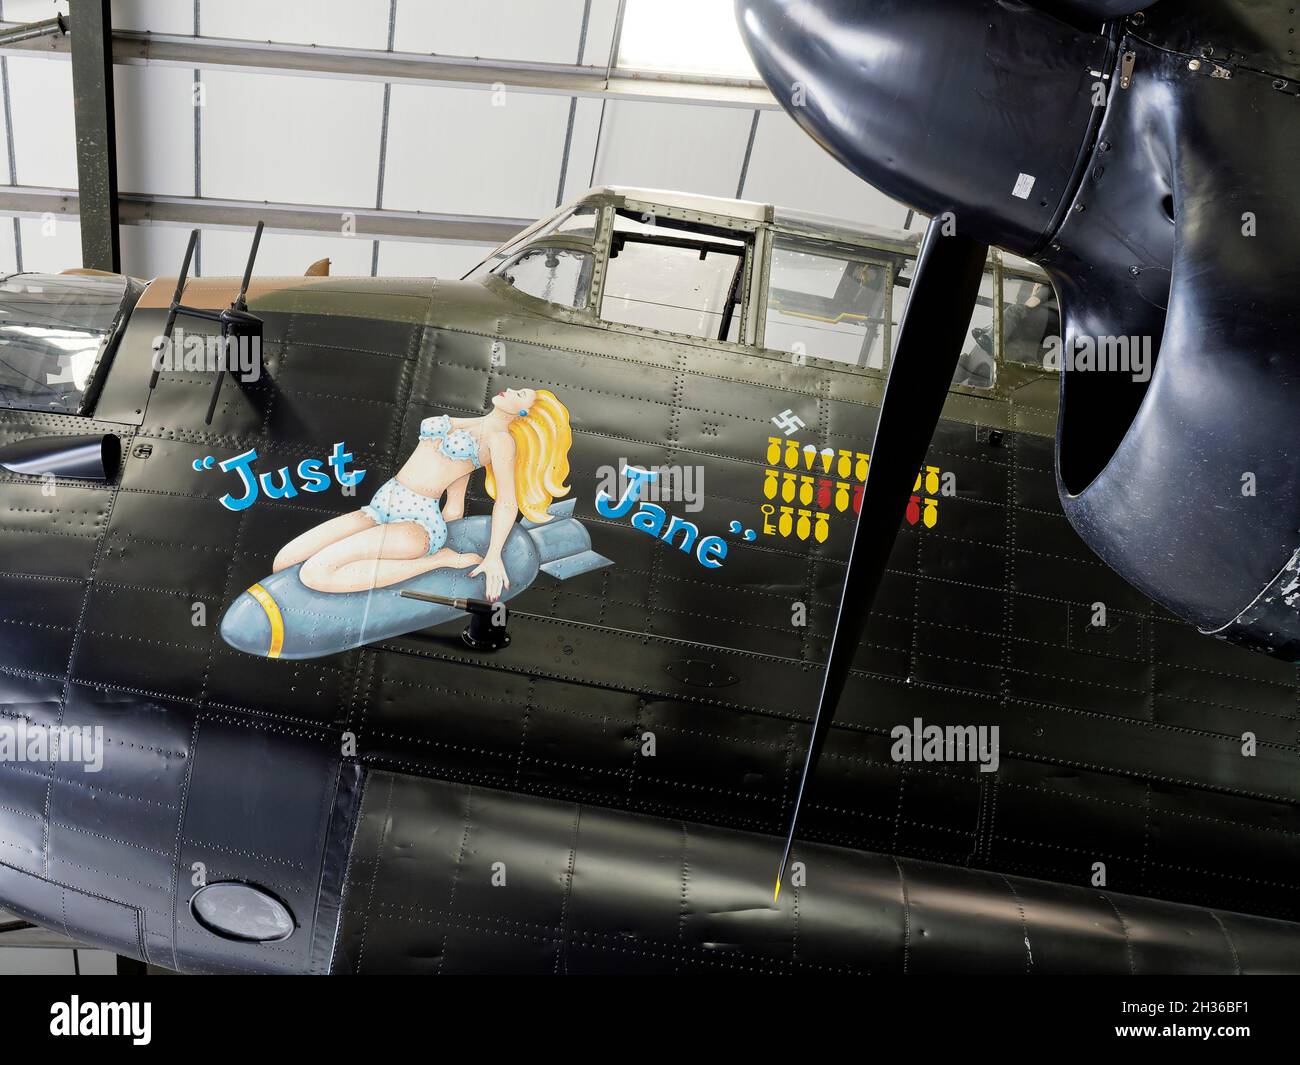 Nose art on Avro Lancaster NX611 'Just Jane' ujnder restoration at the Lincolnshire Aviation Heritage Centre, East Kirkby Airfield near Spilsby. Stock Photo